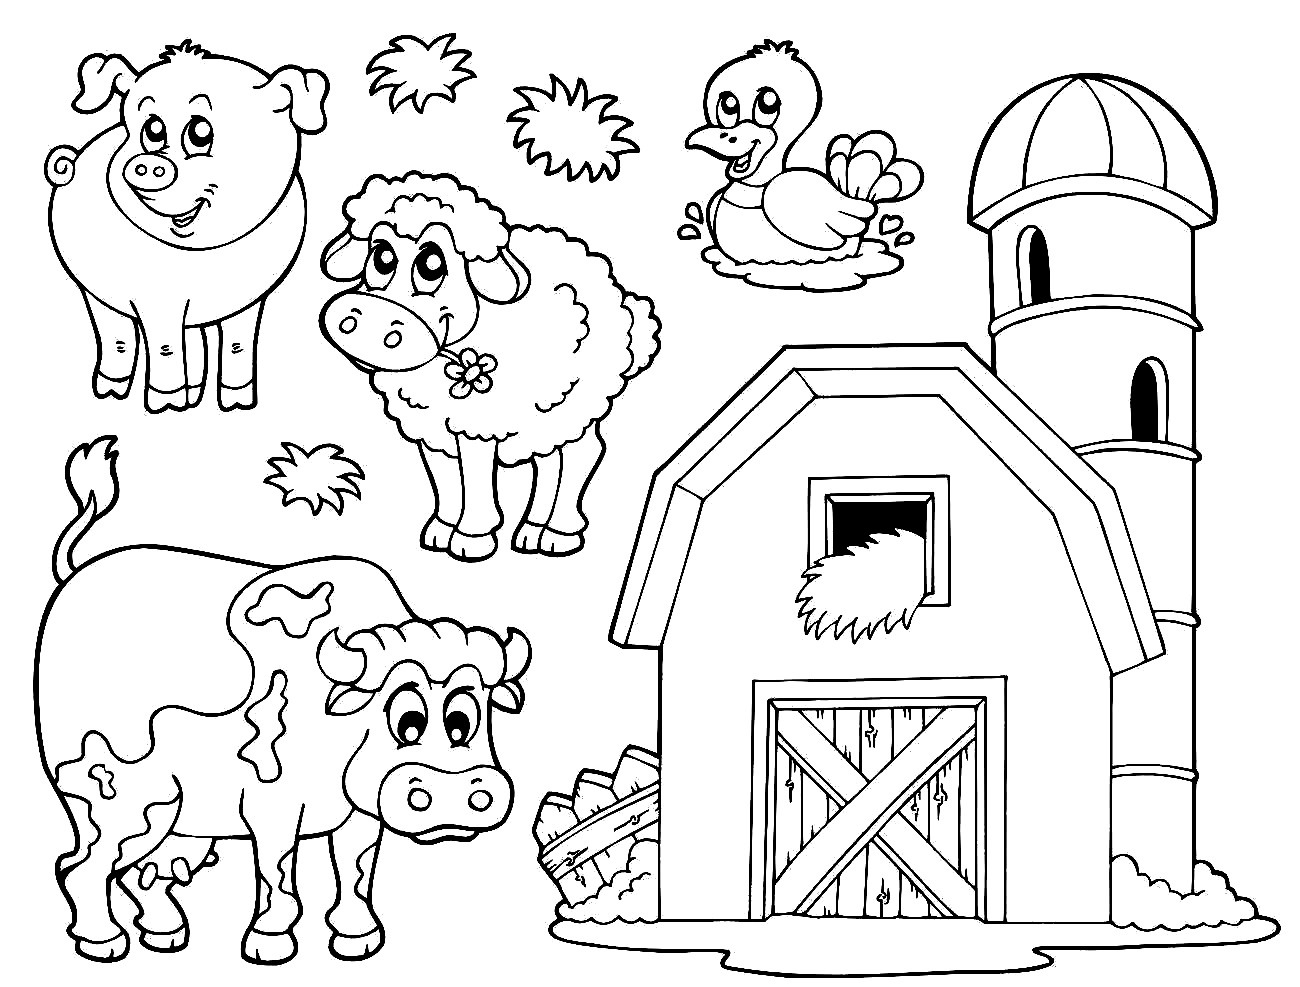 Coloring Pages Of Farm Animals For Preschoolers at Free printable colorings